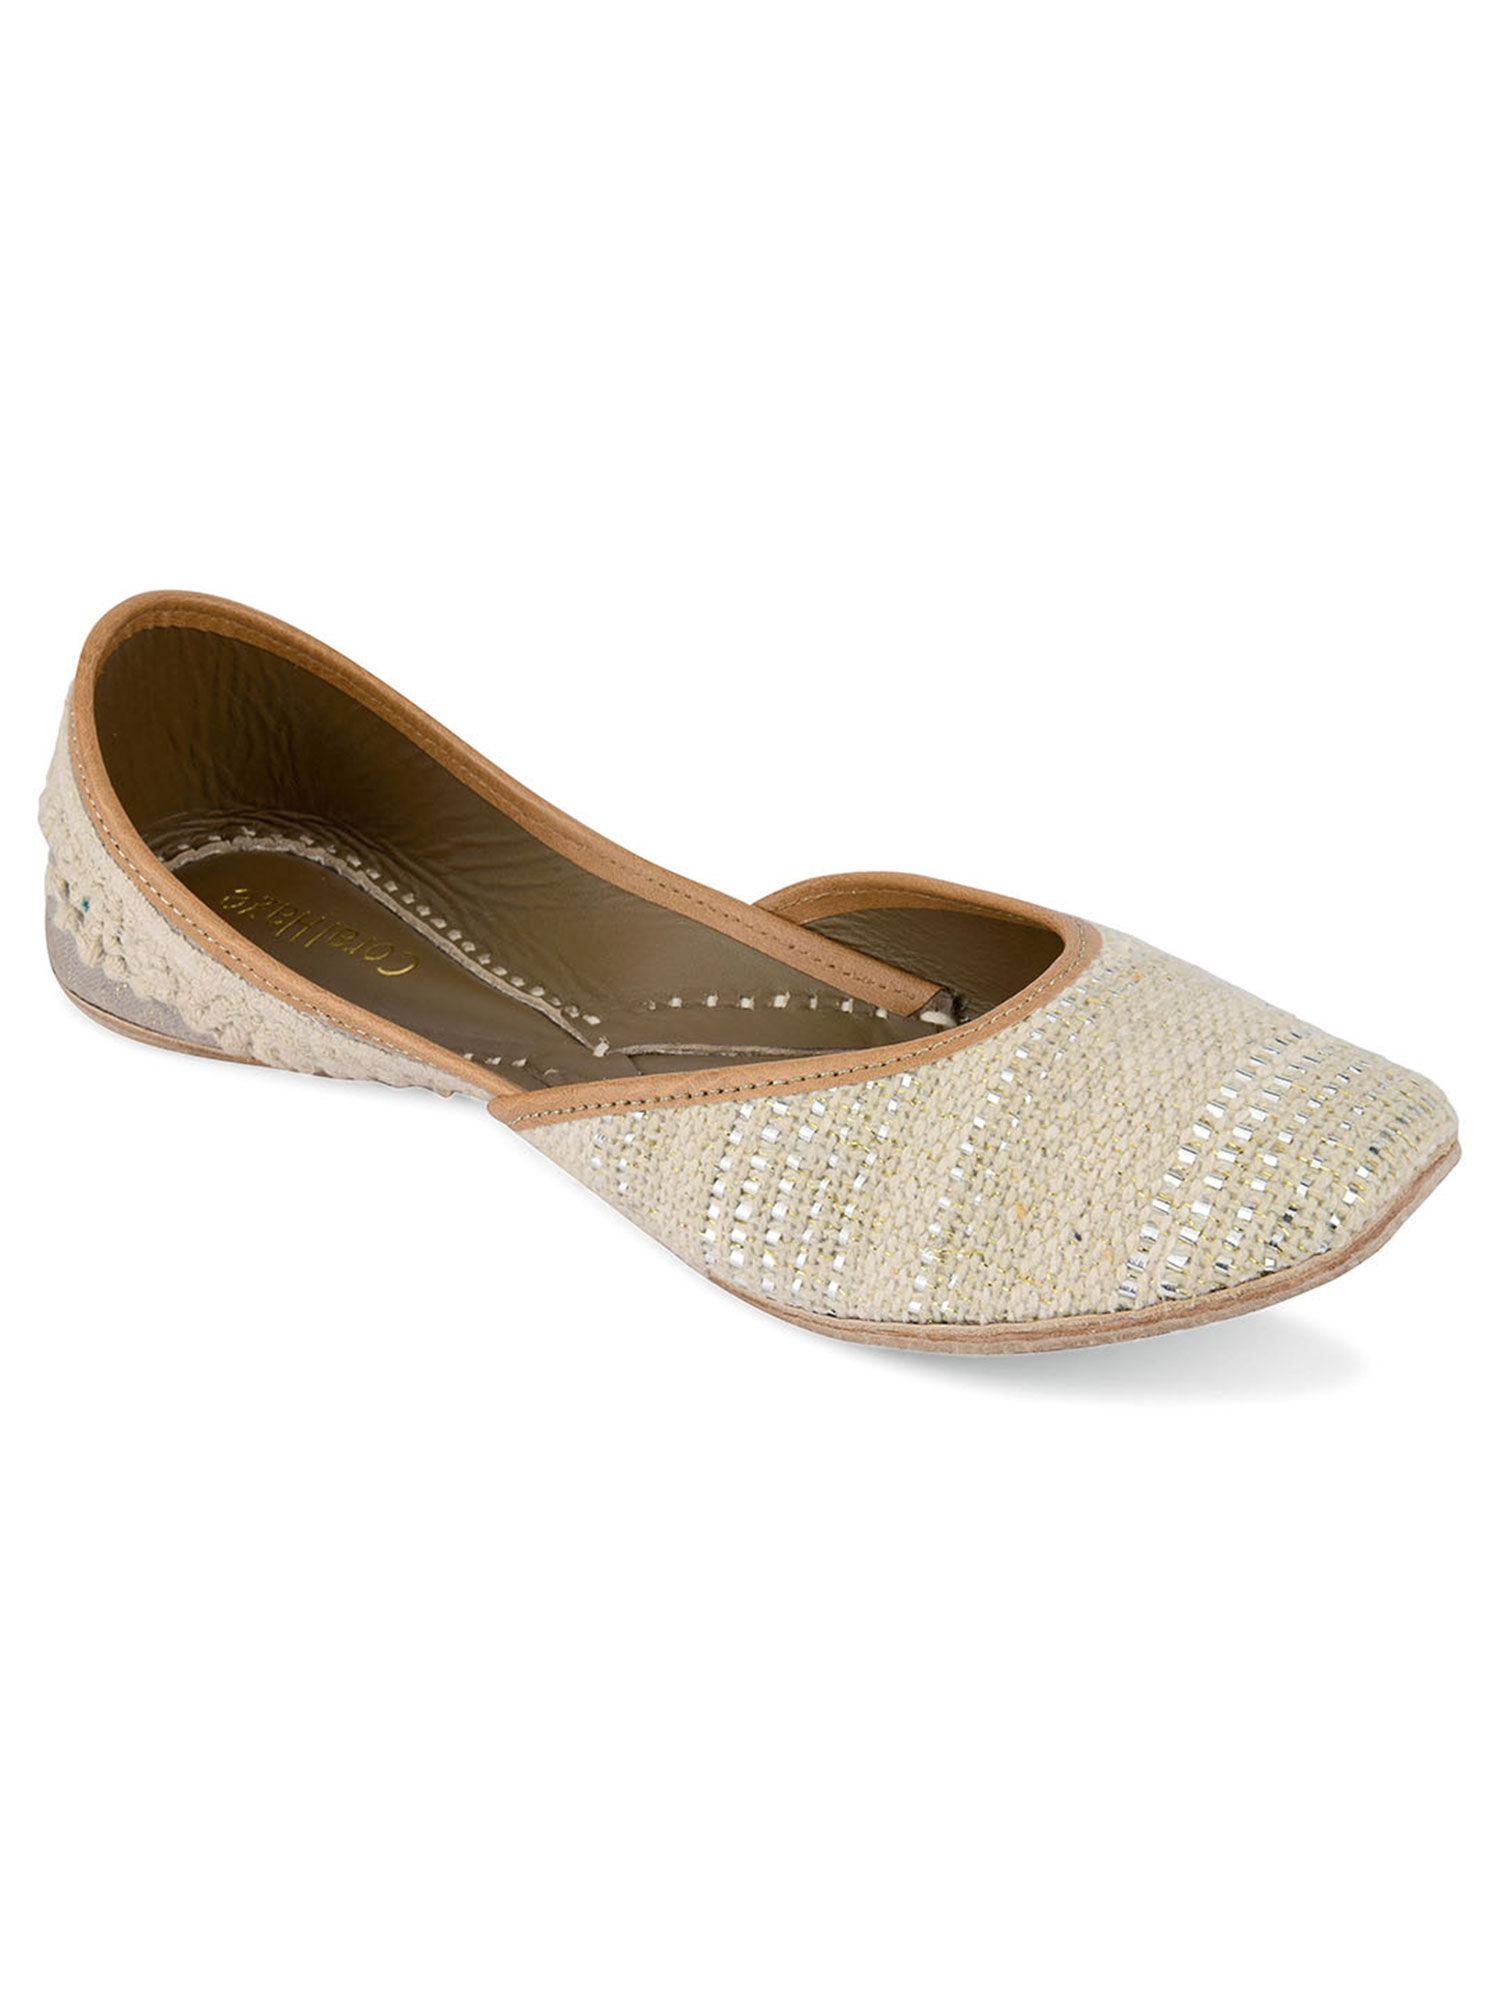 women's ivory and silver woven jacquard juttis